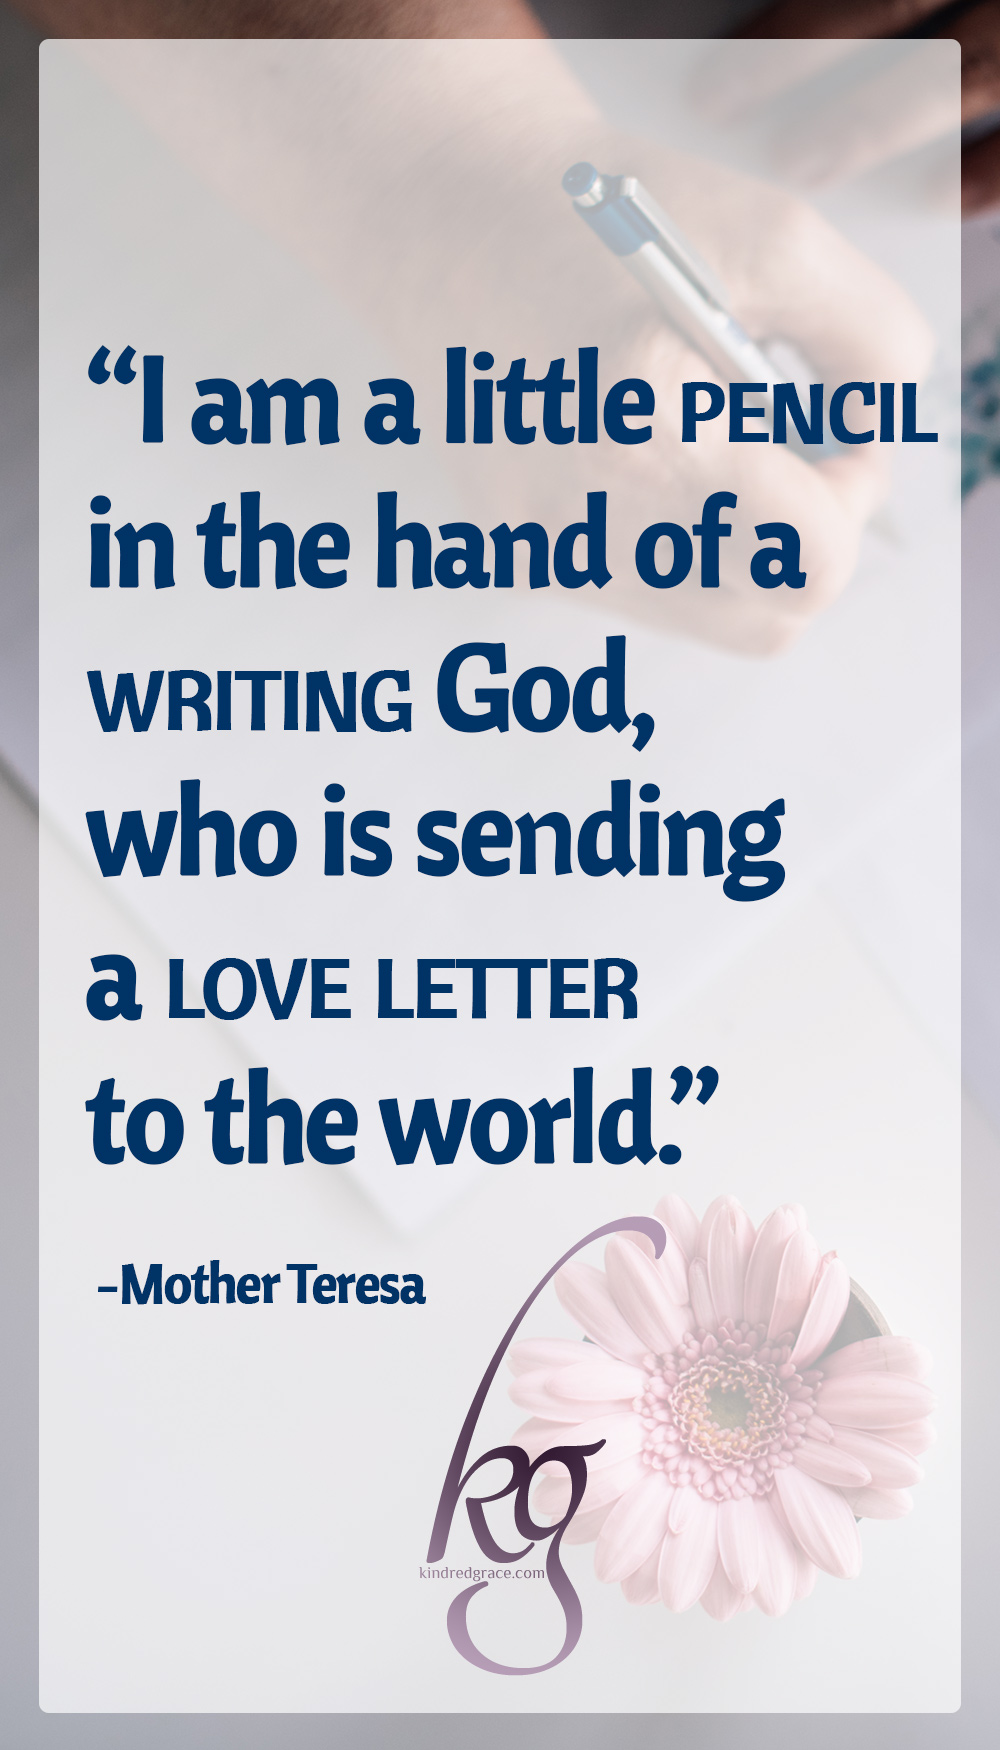 Here we are in the age of instant communication, and letters are no less potent than they were when they were our only option. As a matter of fact, they may be even more effective today, in contrast to the common text message. Letters can be day-brighteners, love-kindlers, and friendship fodder. They can also be a ministry. via @KindredGrace